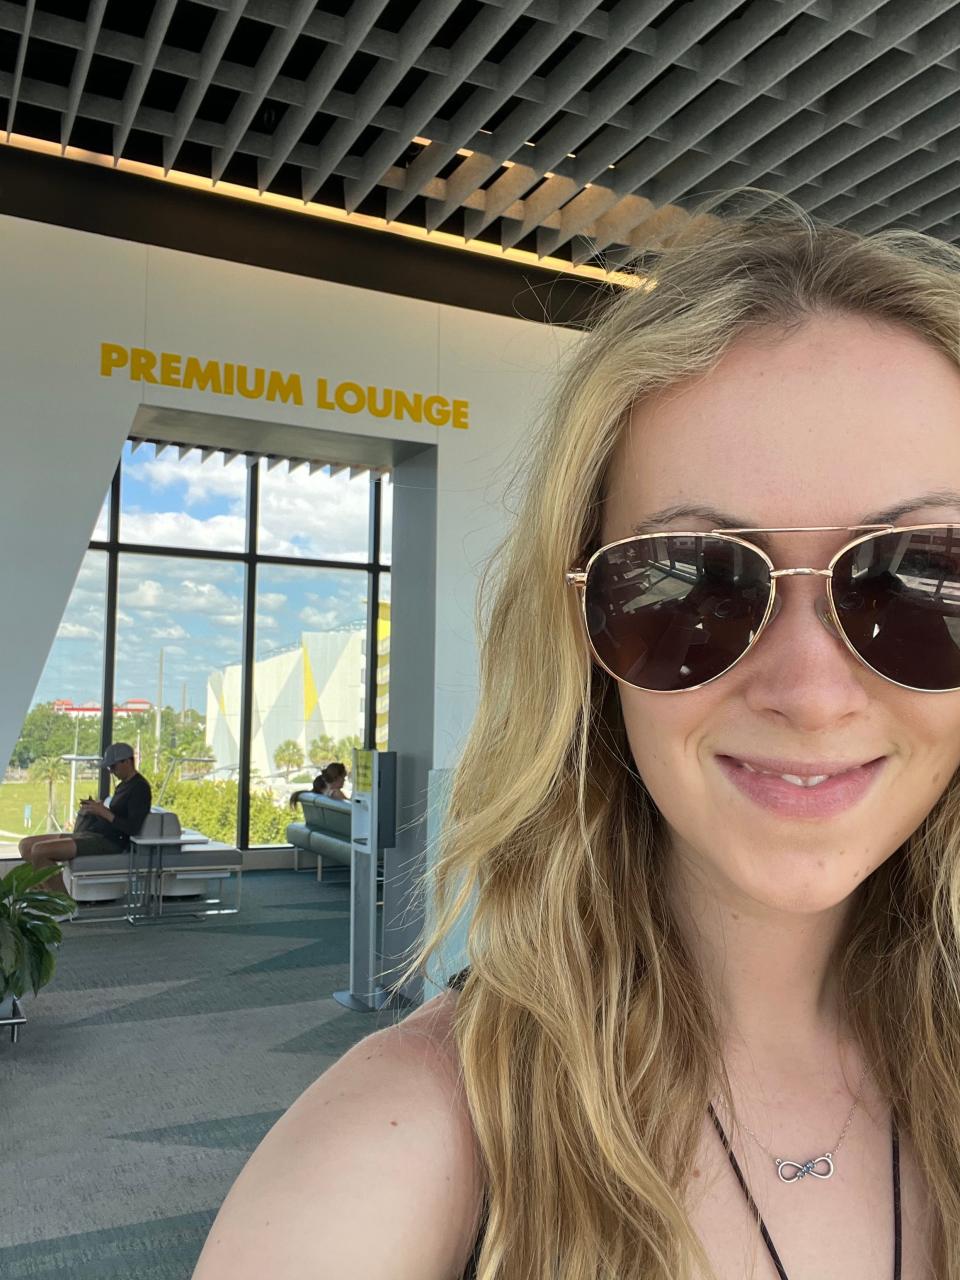 A woman with blonde hair and aviator sunglasses poses in front of a sign that reads premium lounge.